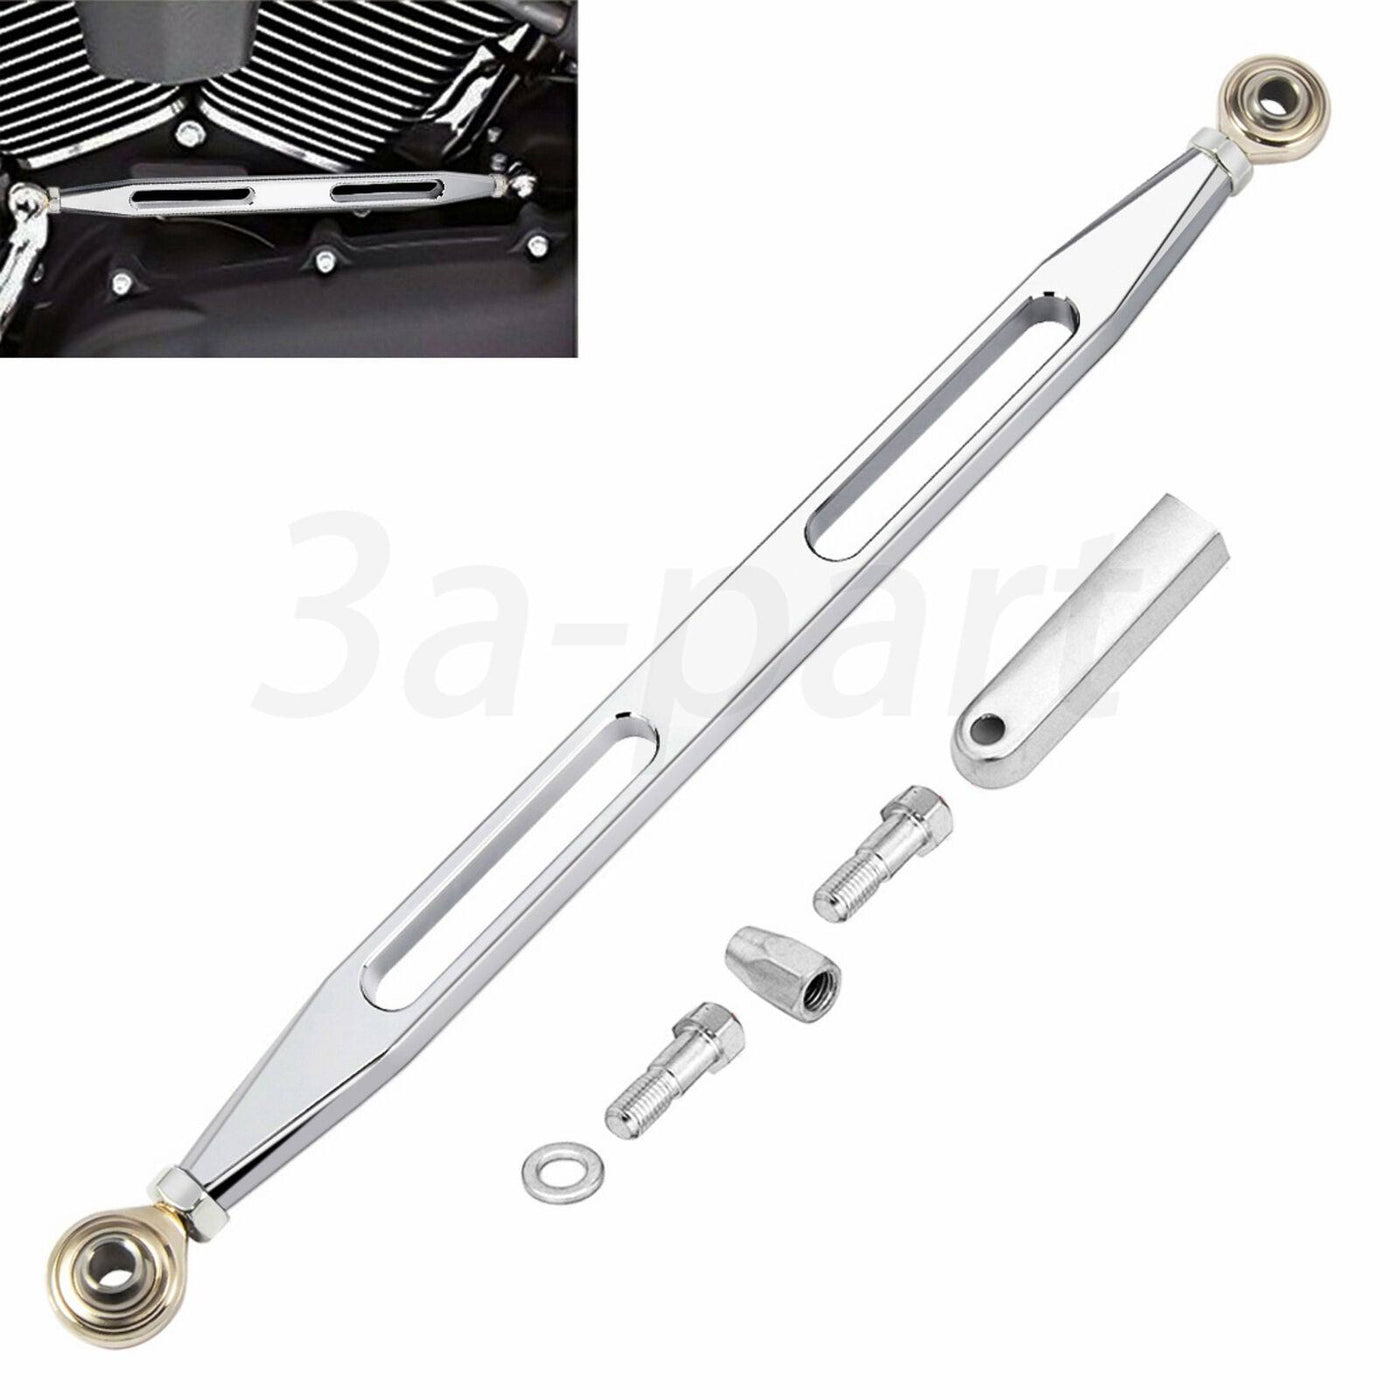 Chrome Shifter Shift Linkage Fit For Harley Softail Road King Street Glide 86-22 - Moto Life Products